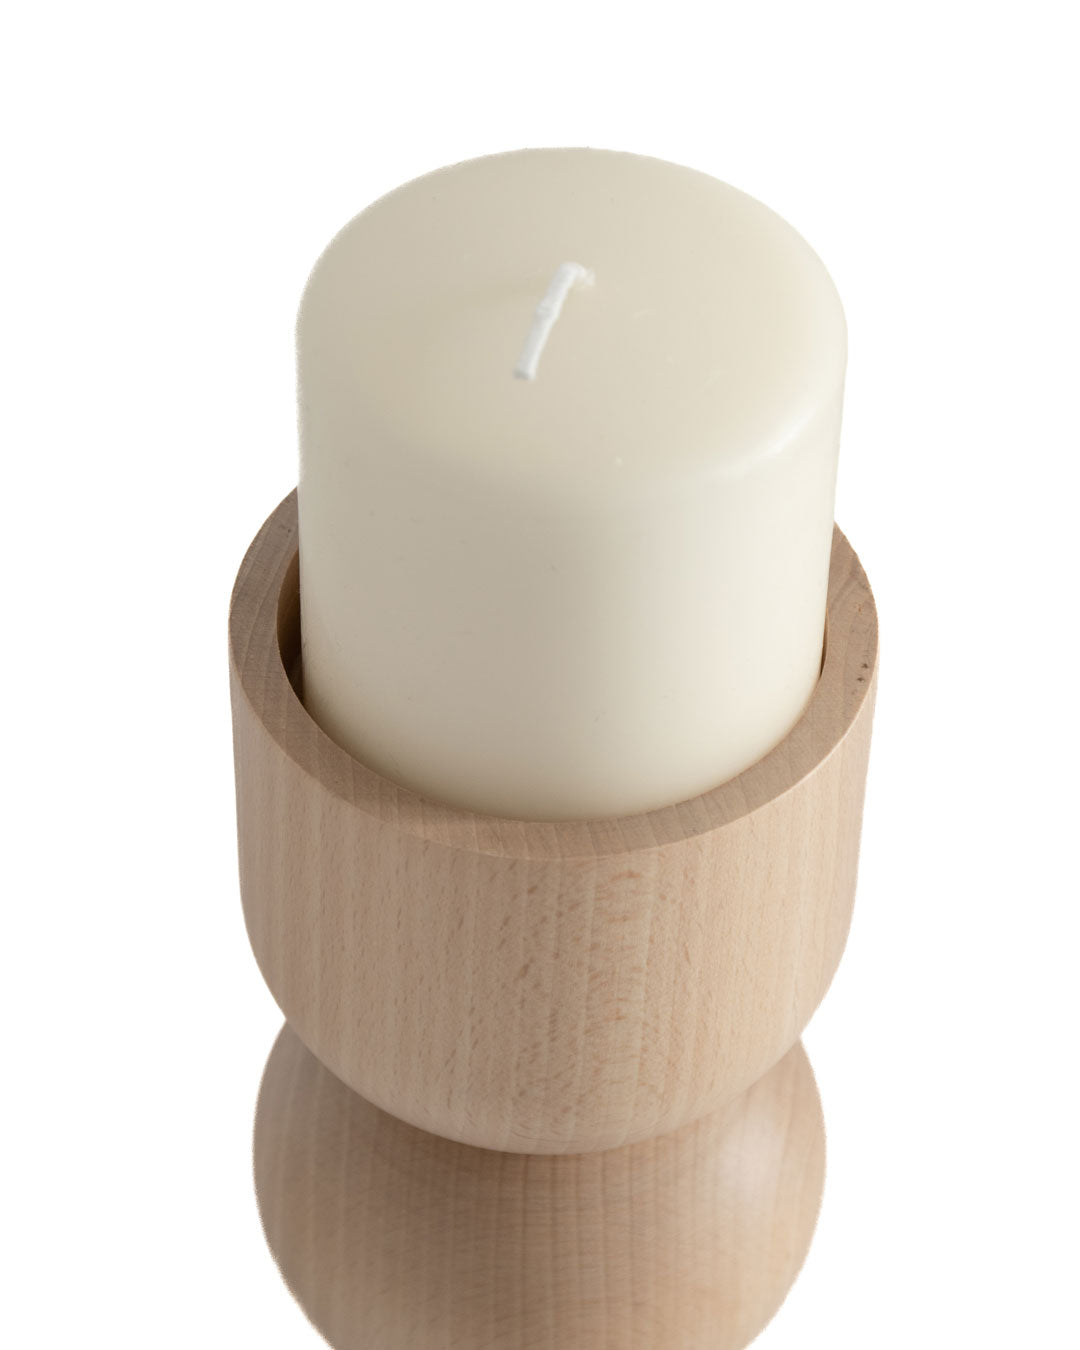 Candleholder-3-in-1-low candle support